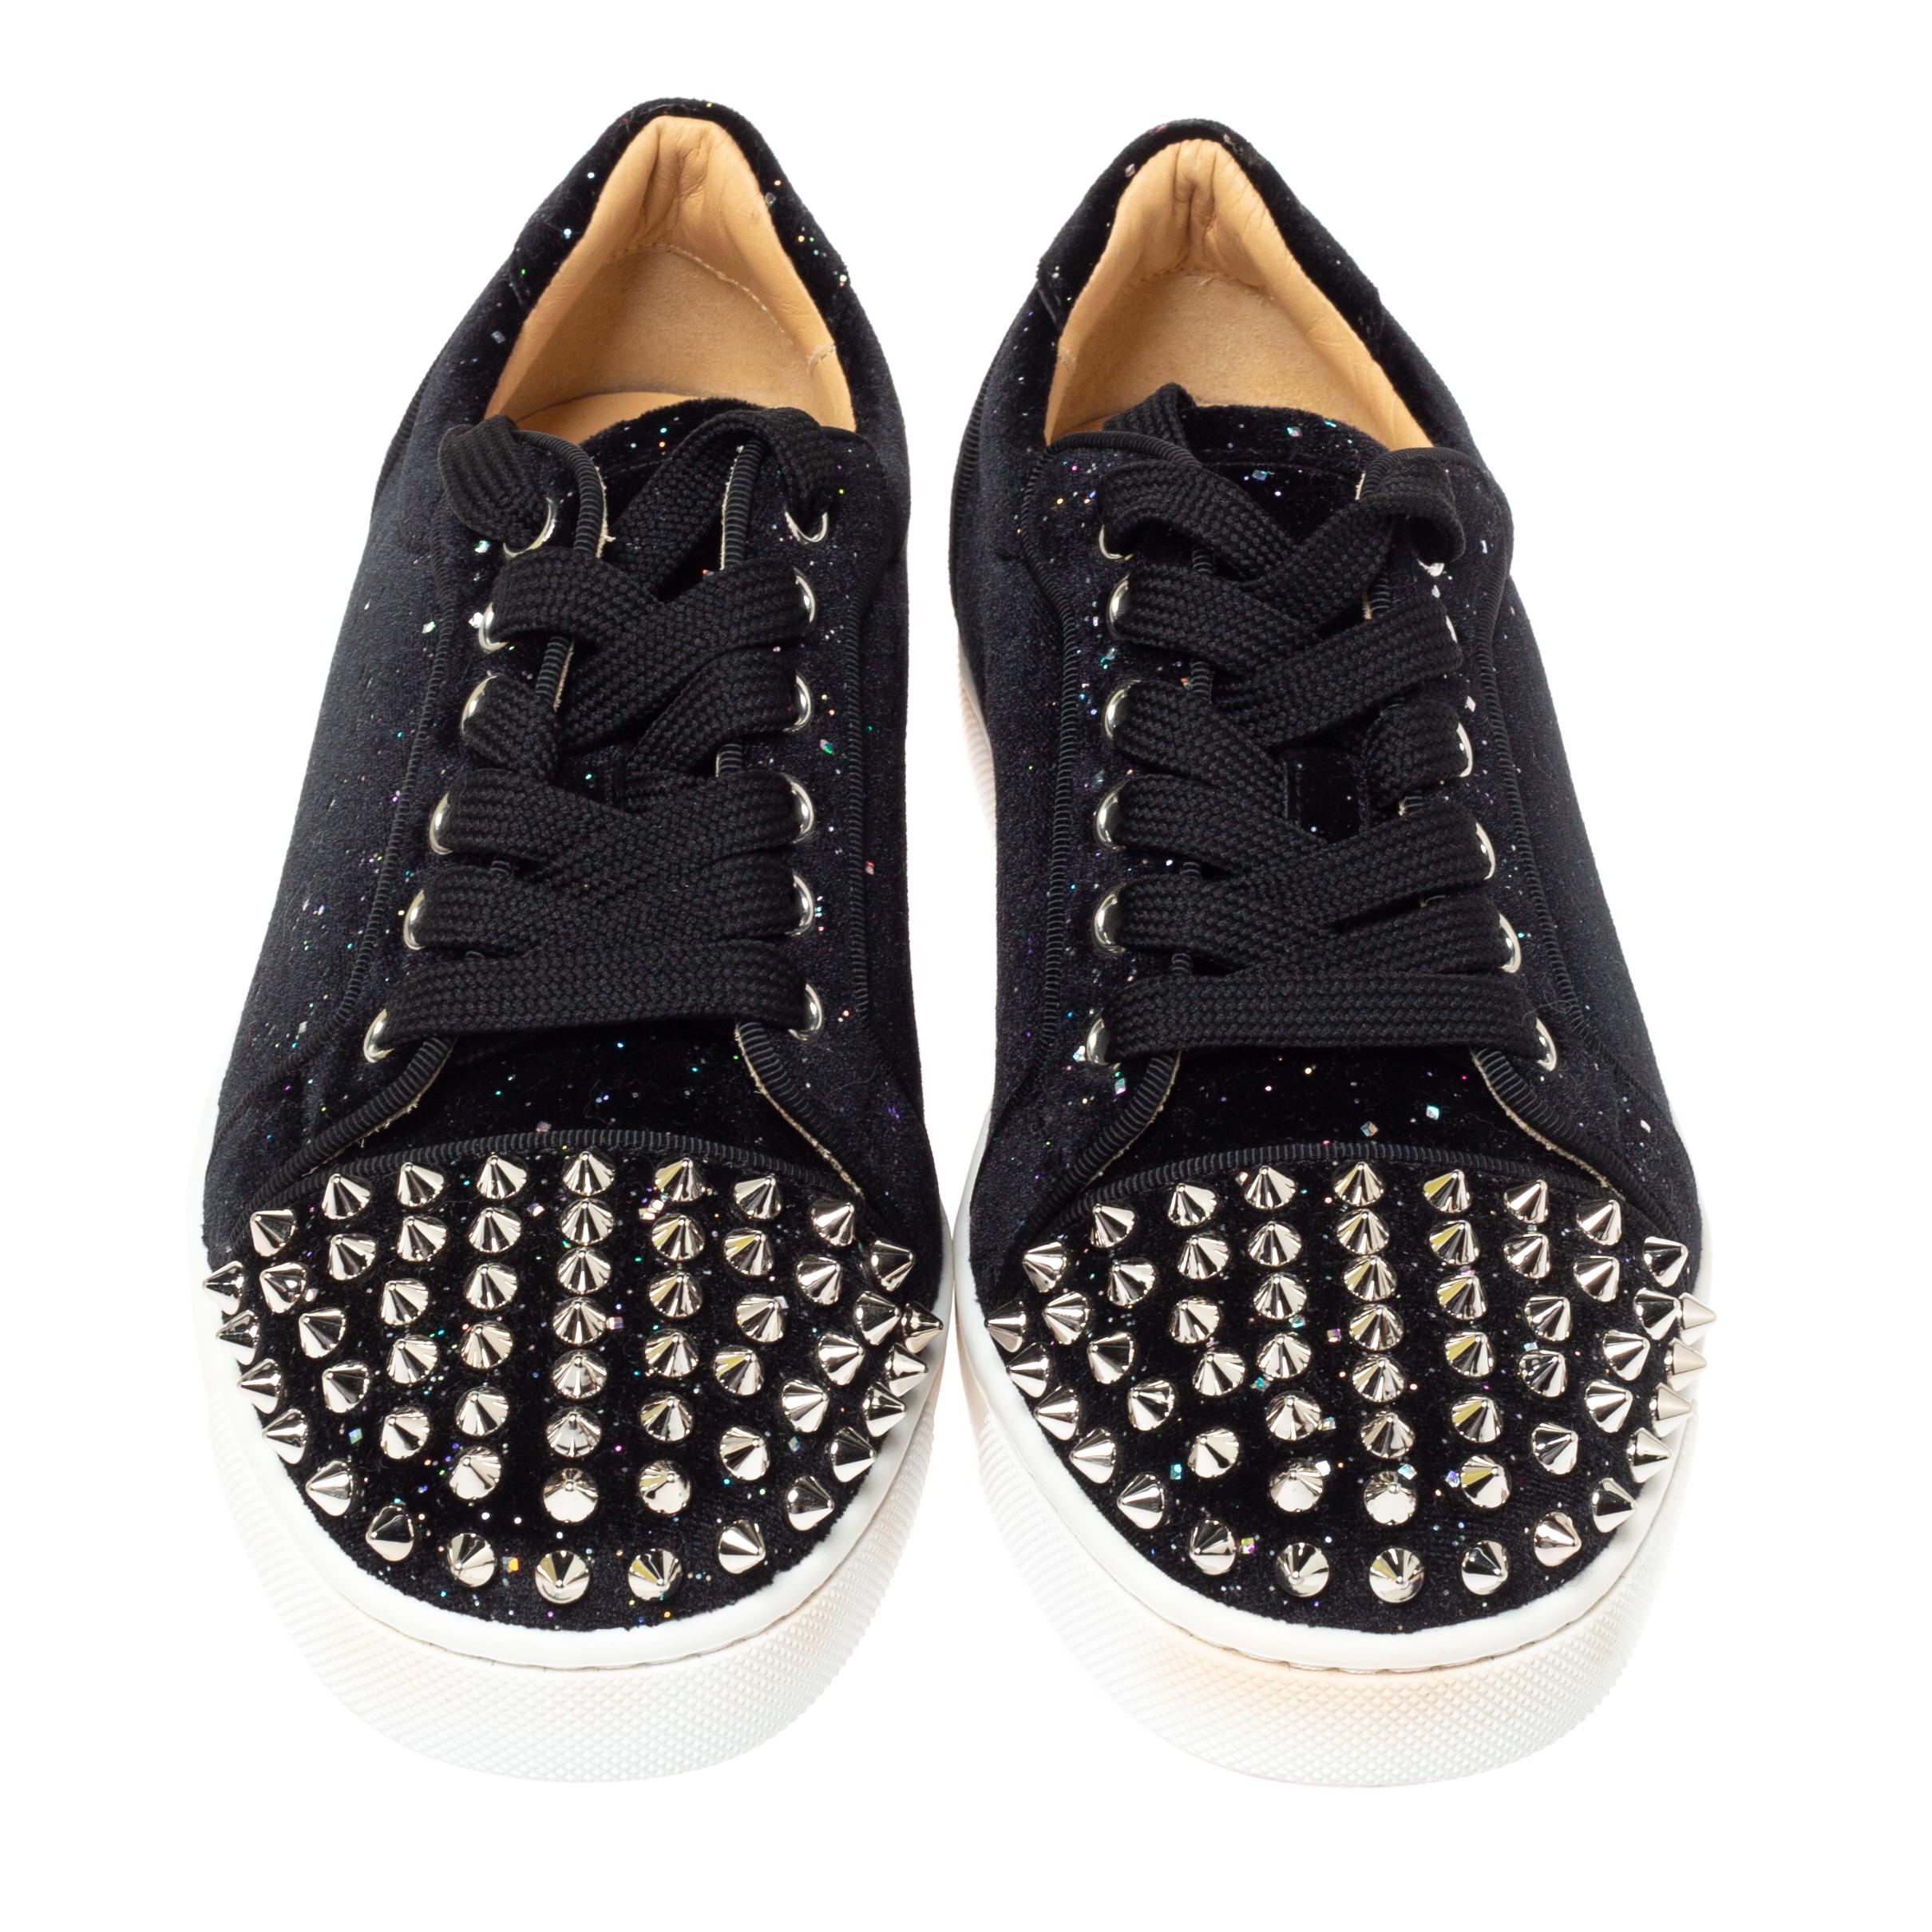 You'll leave your friends amazed every time you step out in these Louis Junior sneakers from Christian Louboutin! In a fabulous black shade, these sneakers are crafted from suede; and feature spike-detailed round toes. They flaunt lace-ups on the